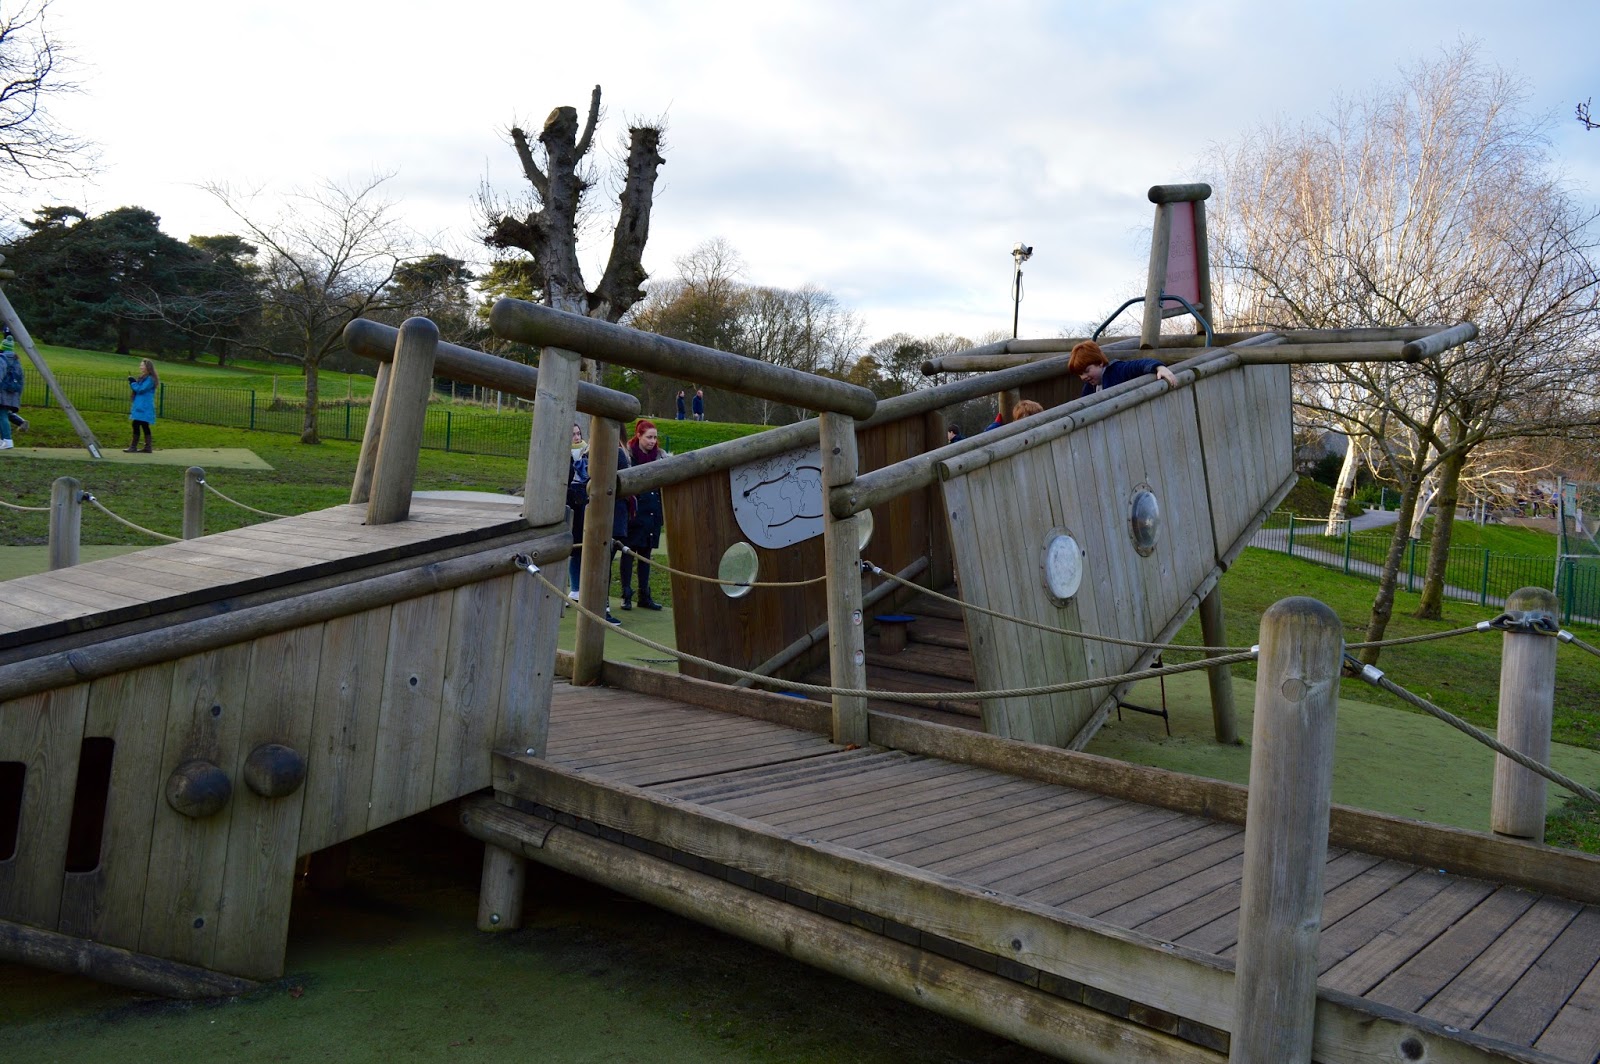 What to do in Valley Gardens, Harrogate | Play area, Pitch & Putt, events & more - wooden plane